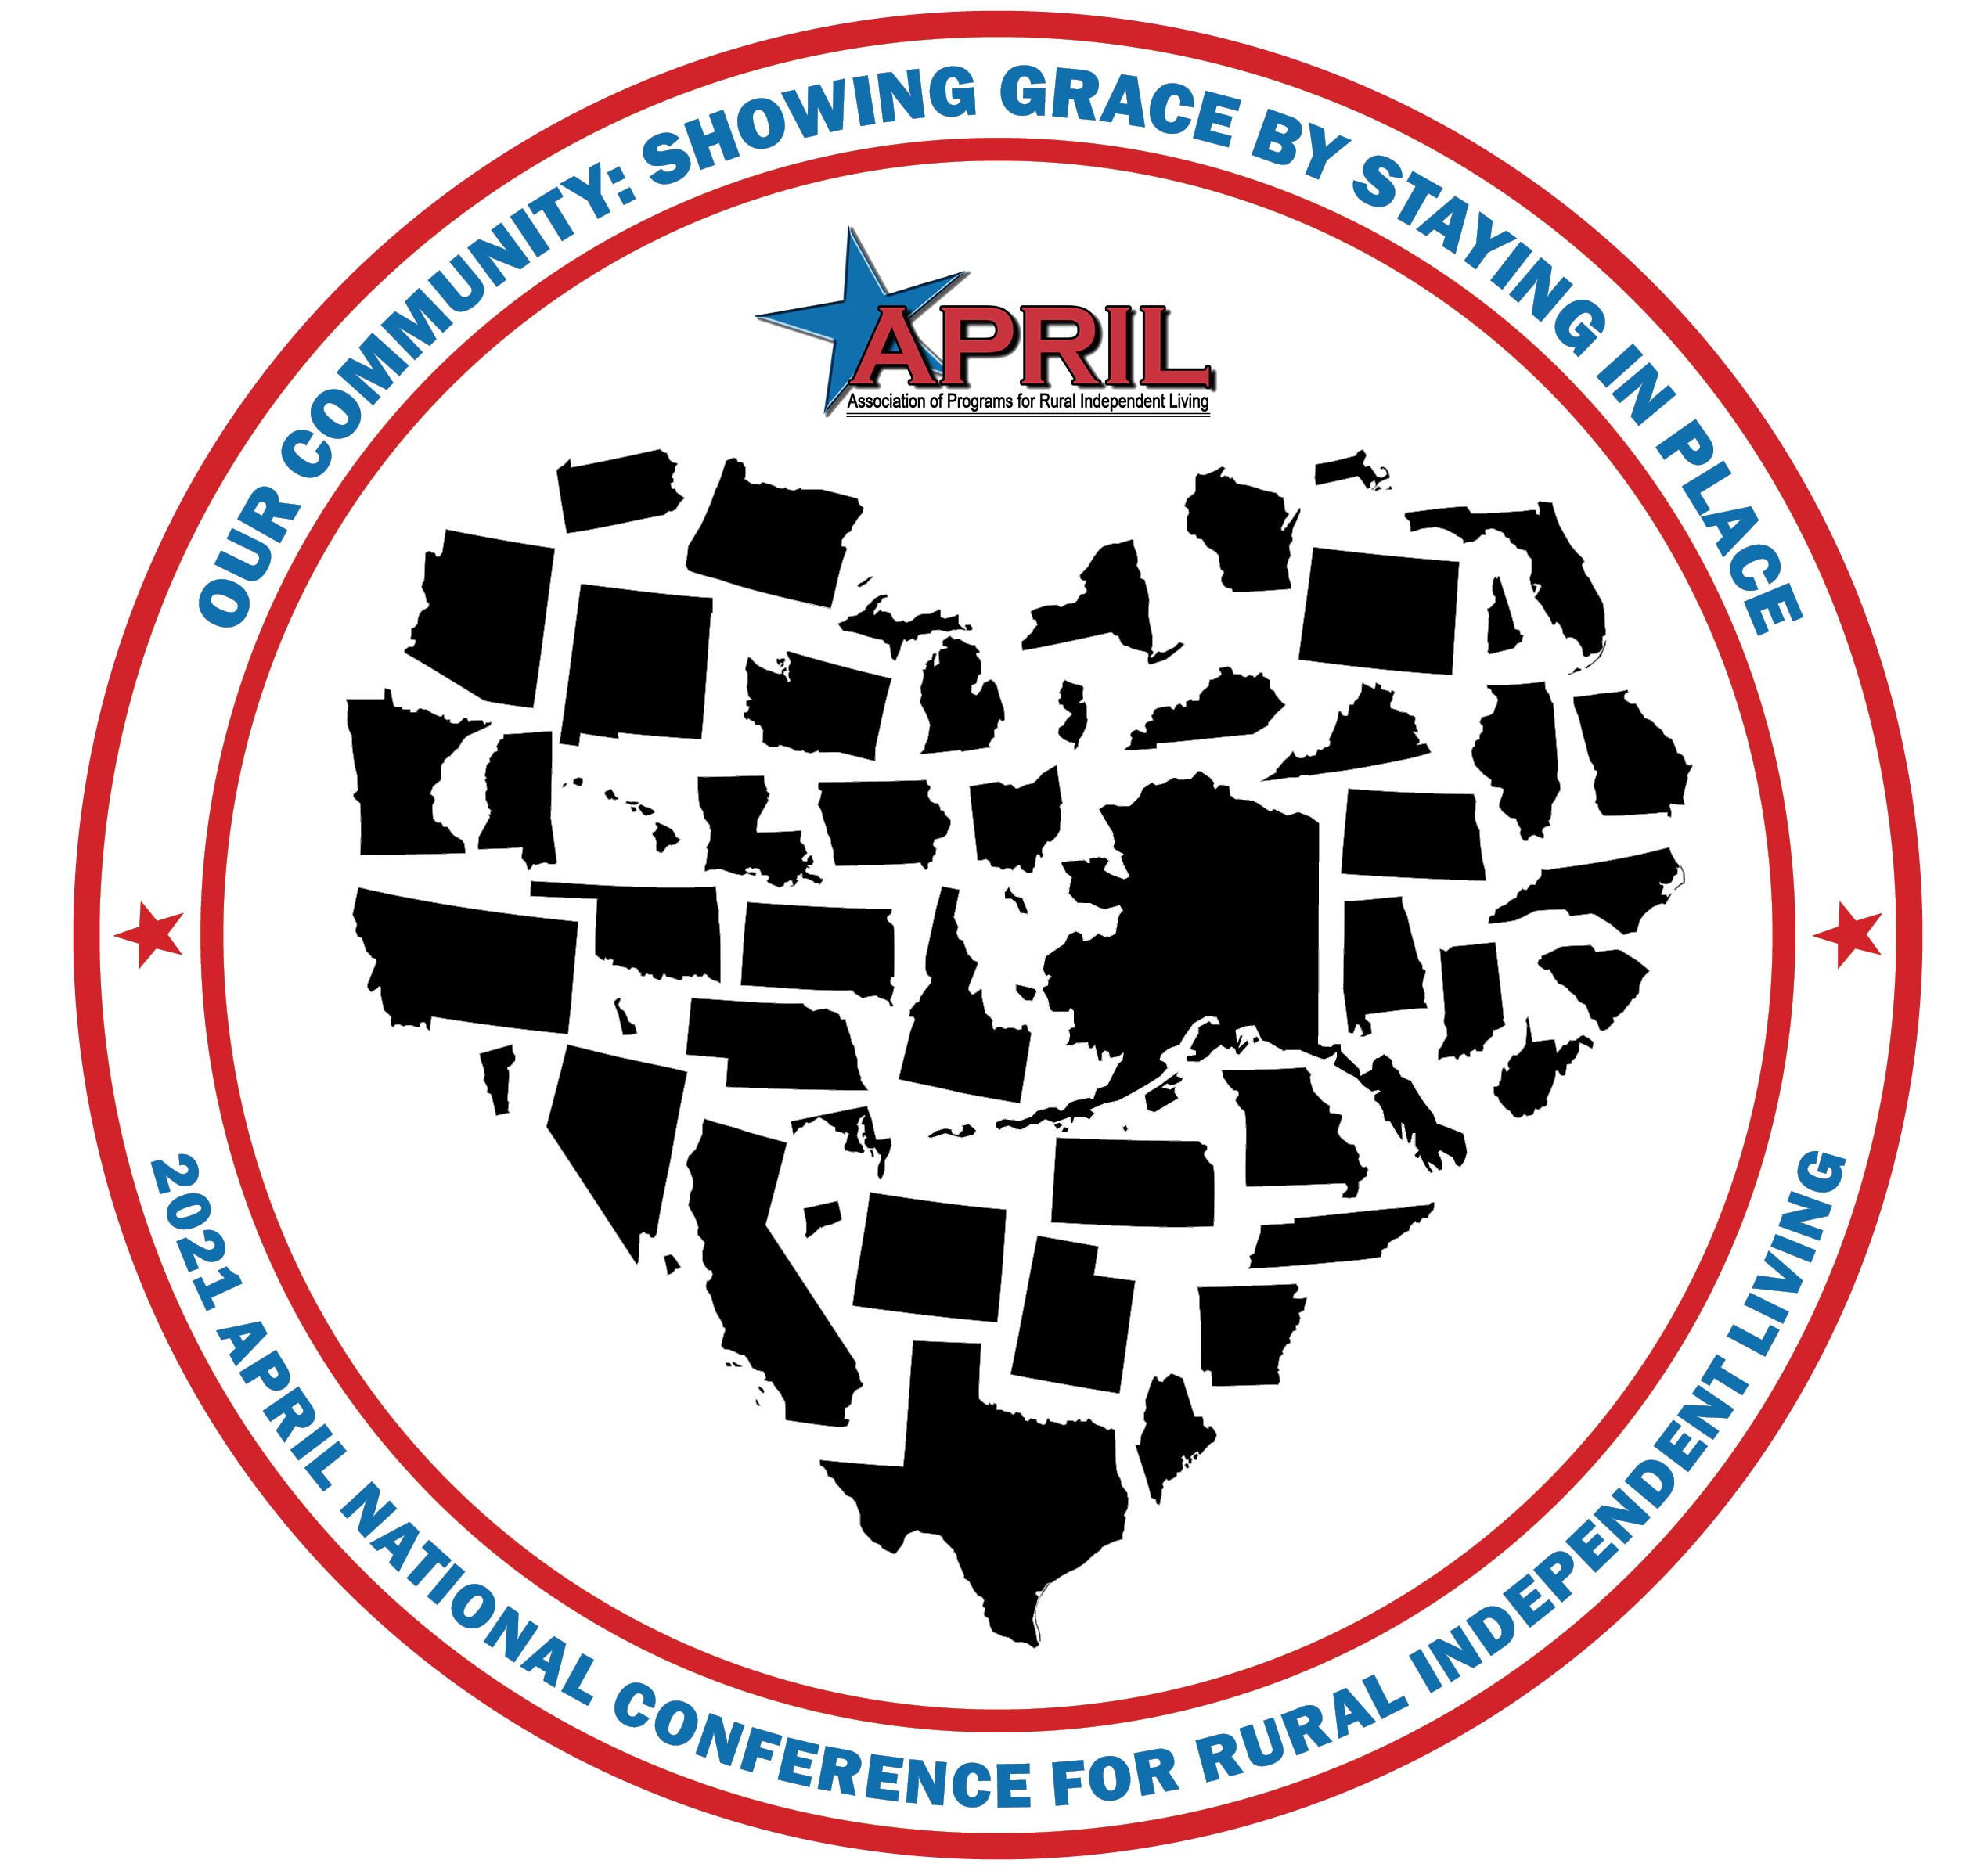 APRIL Logo APRIL red letters Association of Program for Rural Independent Living with a Blue Star with a Circle and a heart with all the united states within it. Our Community Showing Grace by Staying in Place 